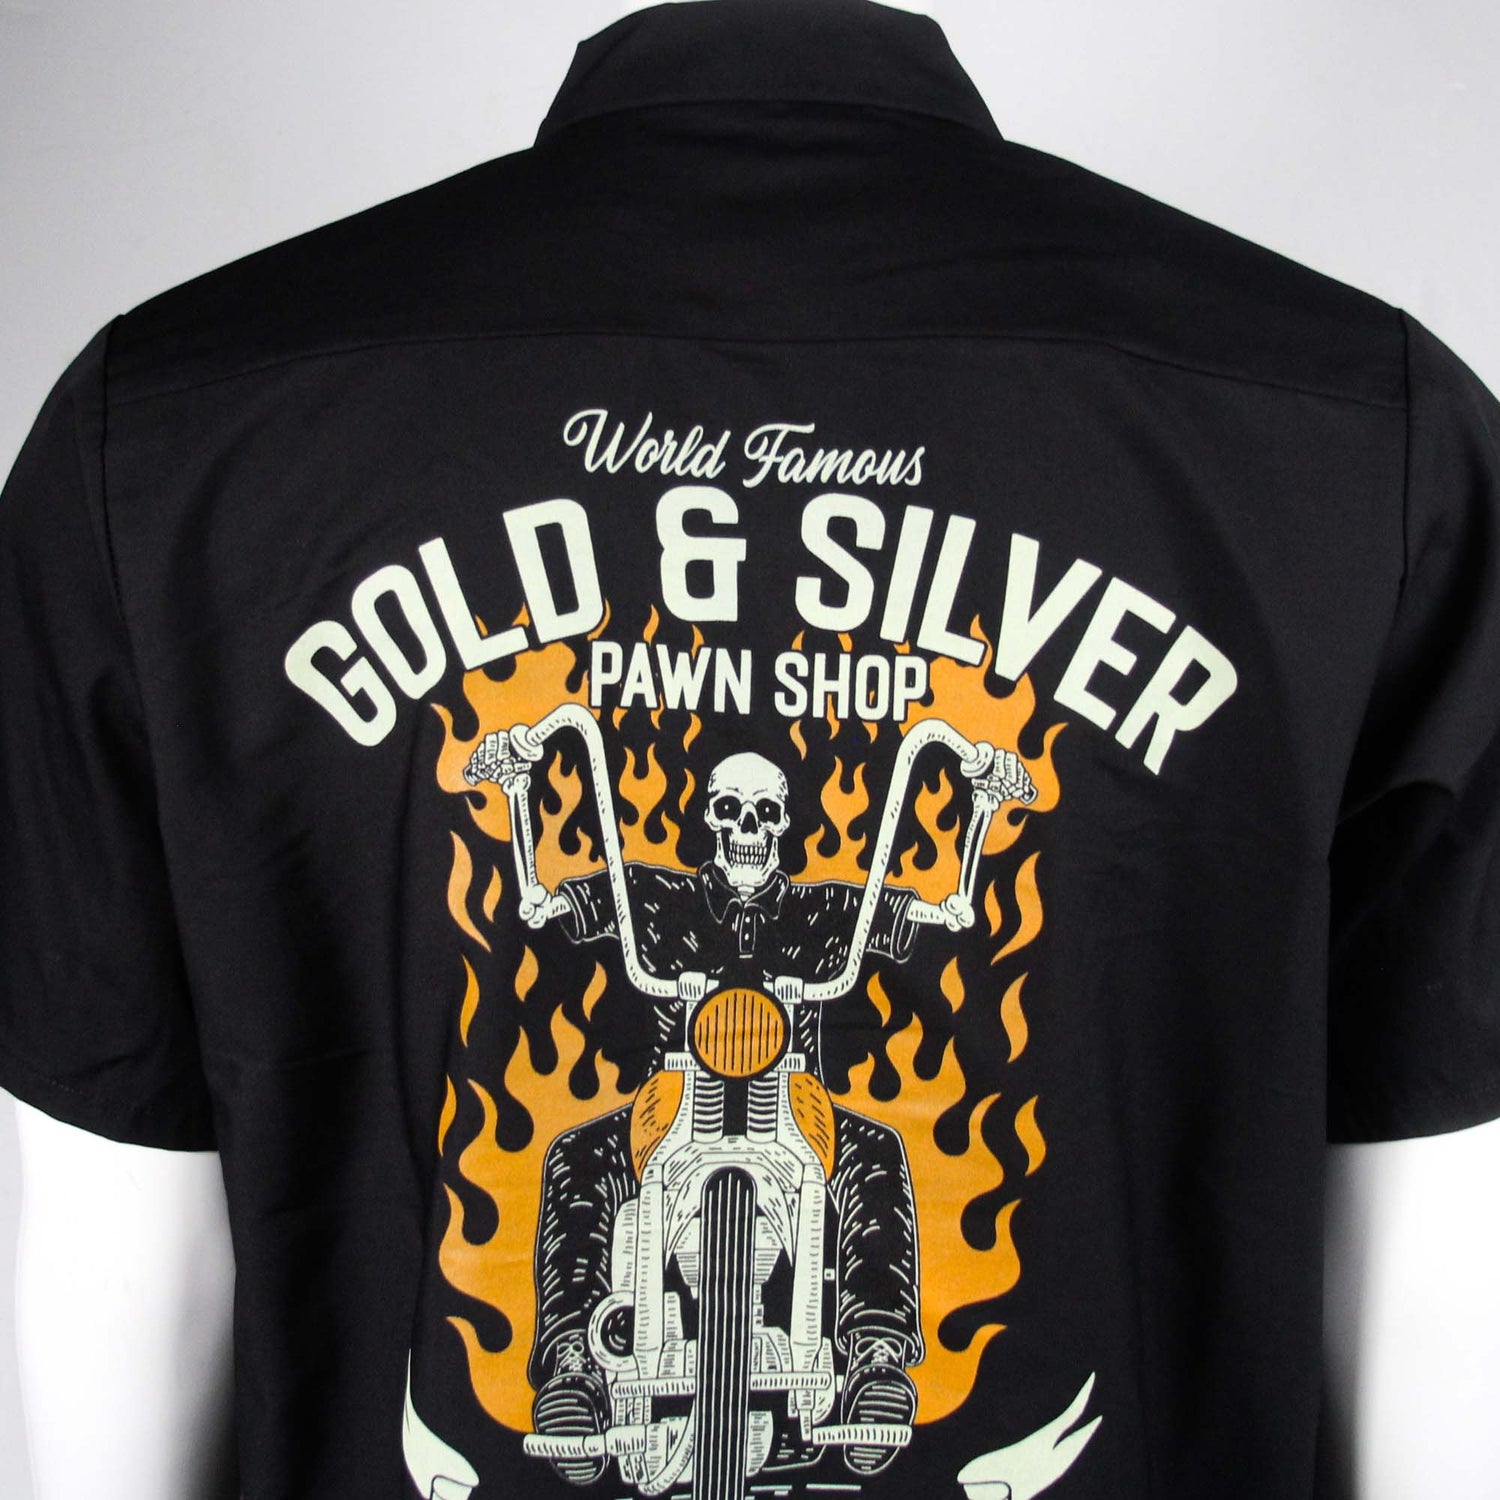 Gold & Silver Pawn Shop Collard Button Up Skeleton On Motorcycle T-Shirt Details